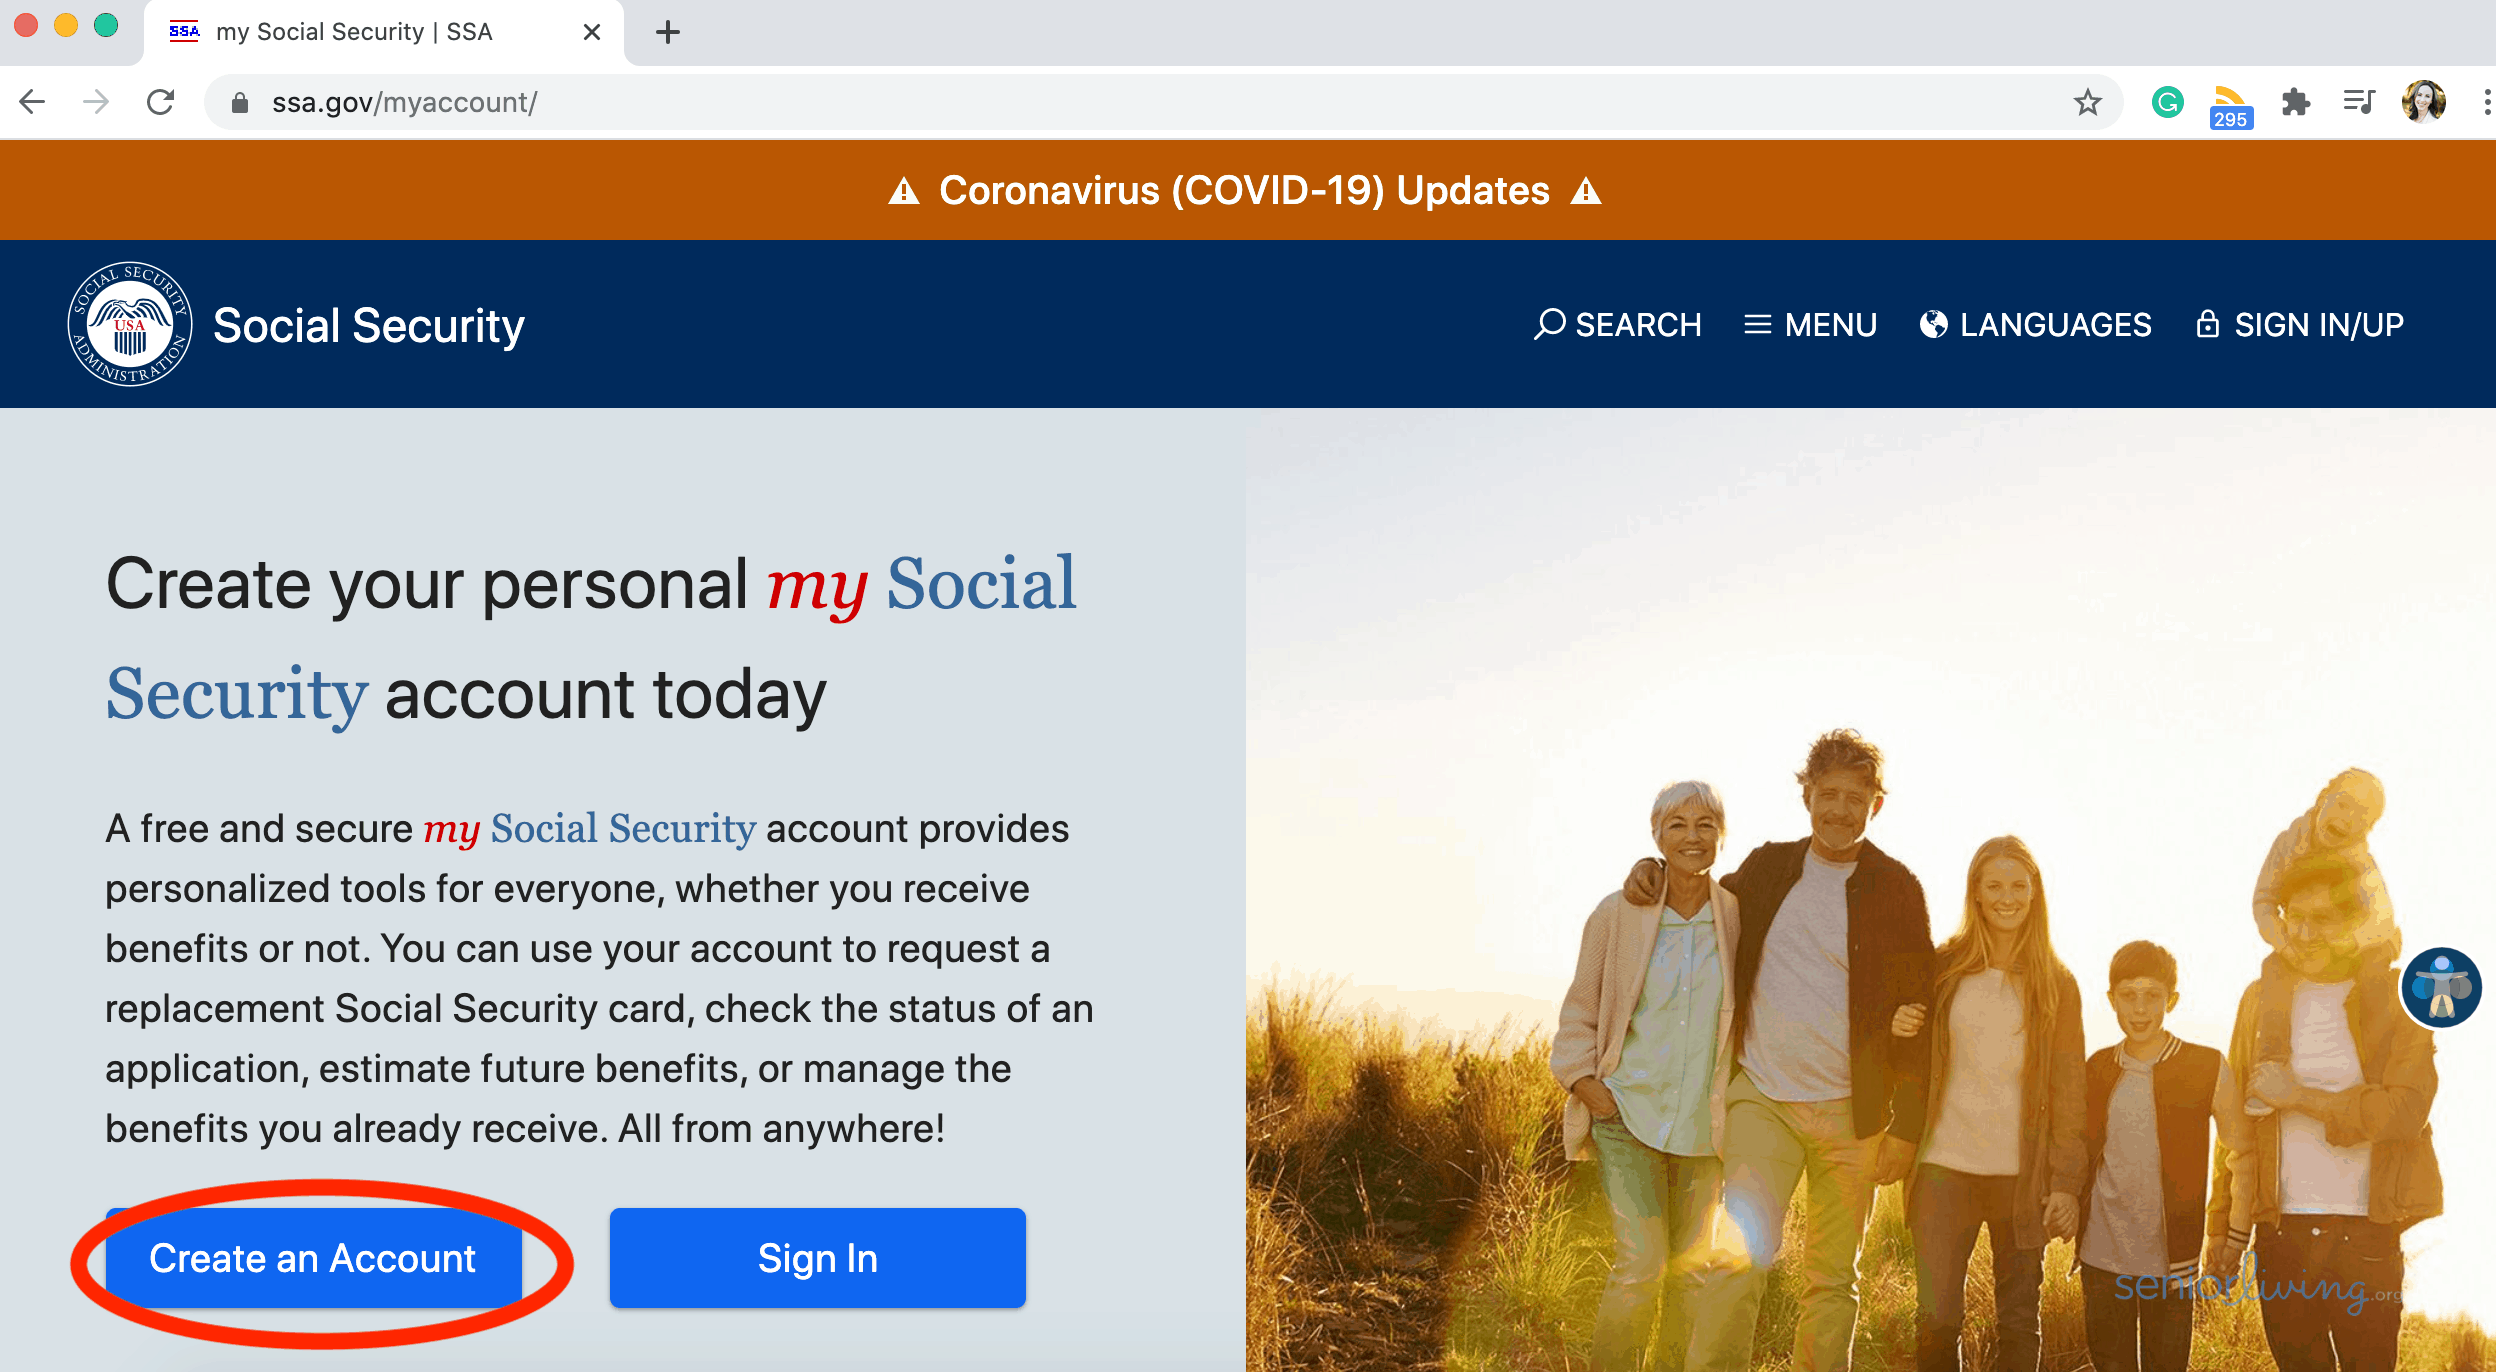 Click Create an Account on the my Social Security home page